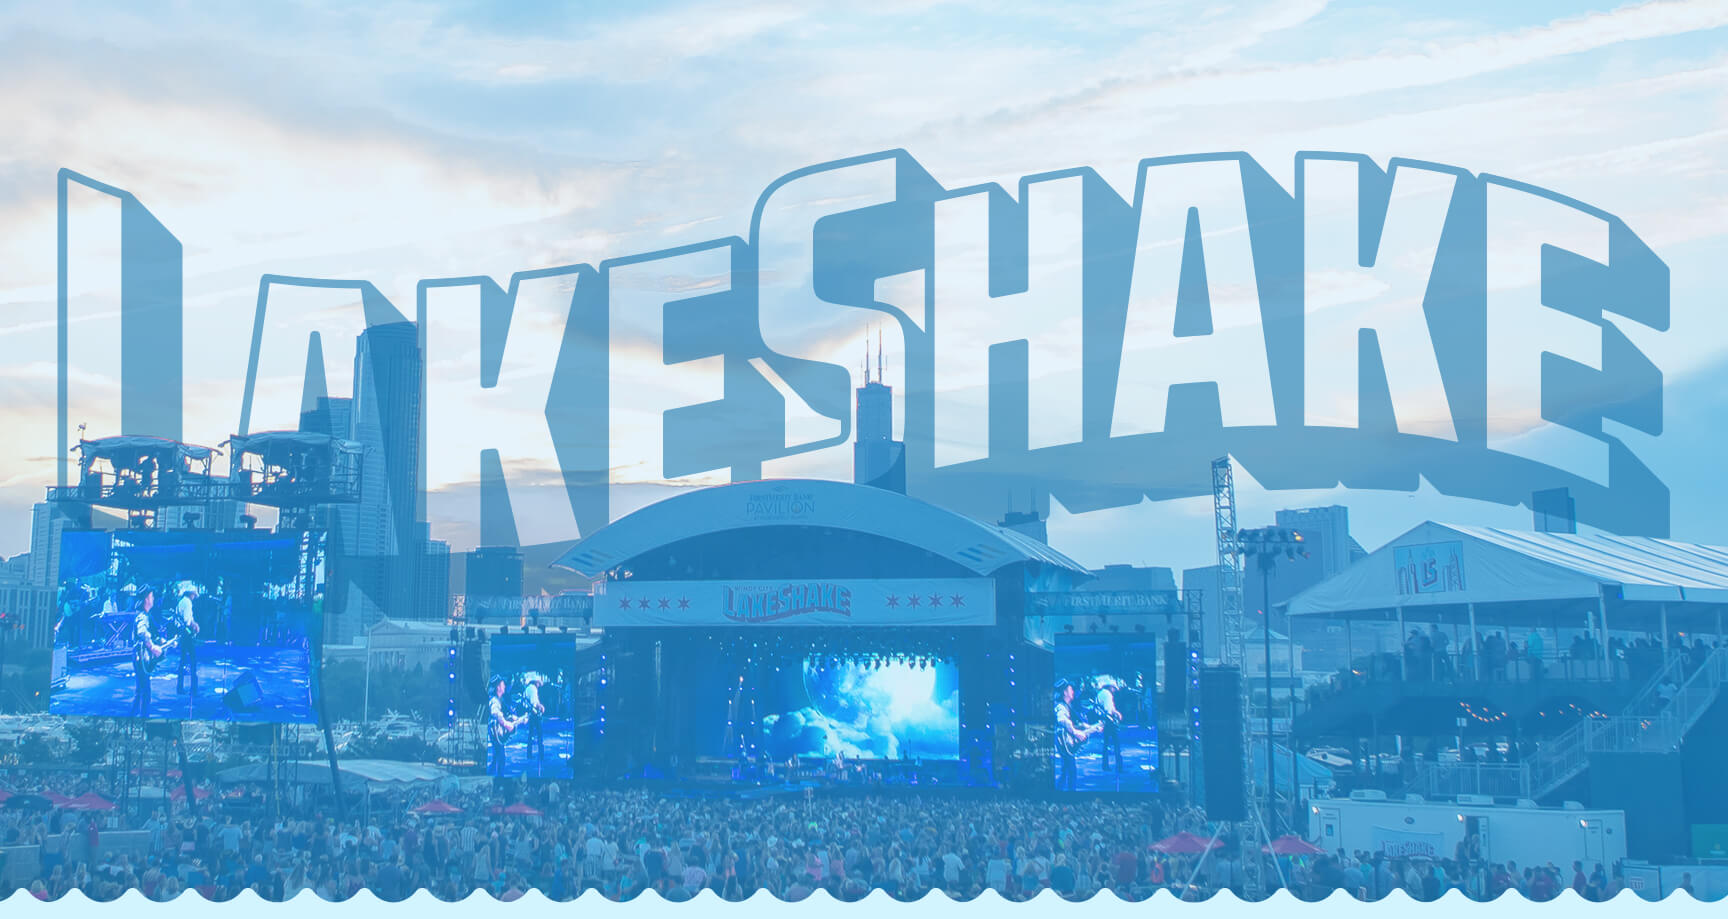 Horizontal logo on brand color treated image of Chicago skyline and festival grounds for Country Lake Shake country music festival in Chicago, Illinois